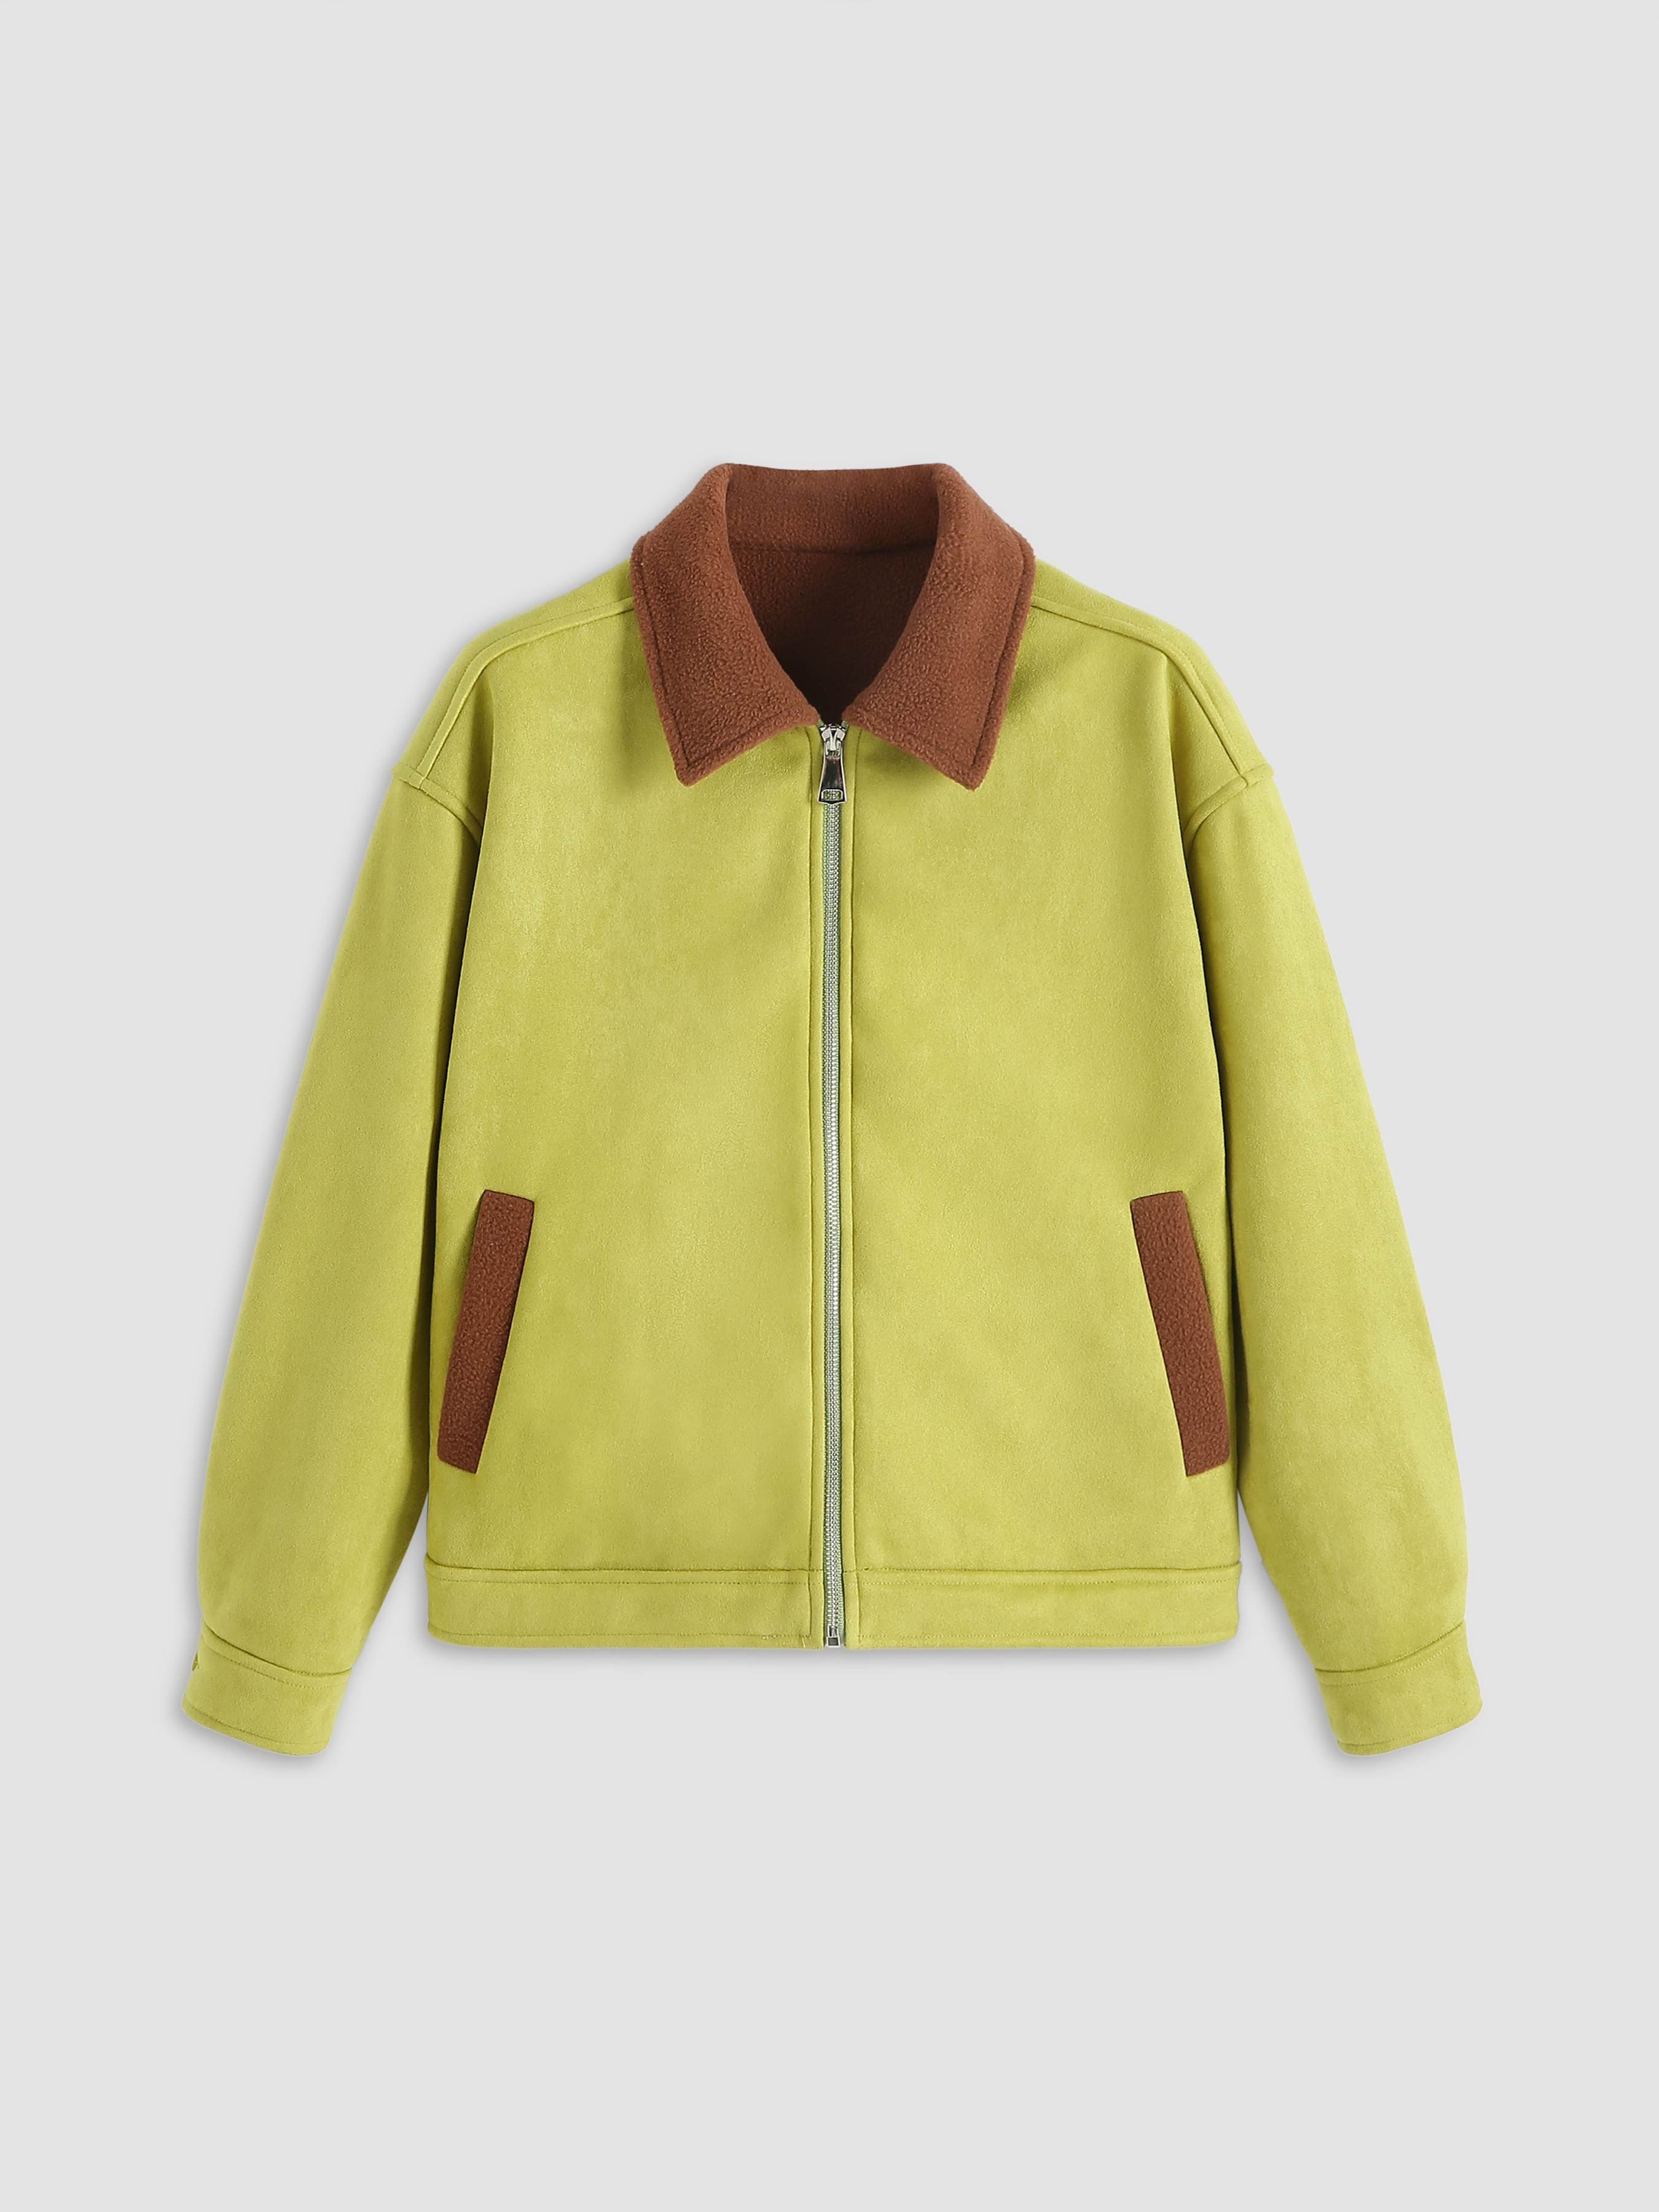 Teddy Patchy Zip Up Jacket - Cider